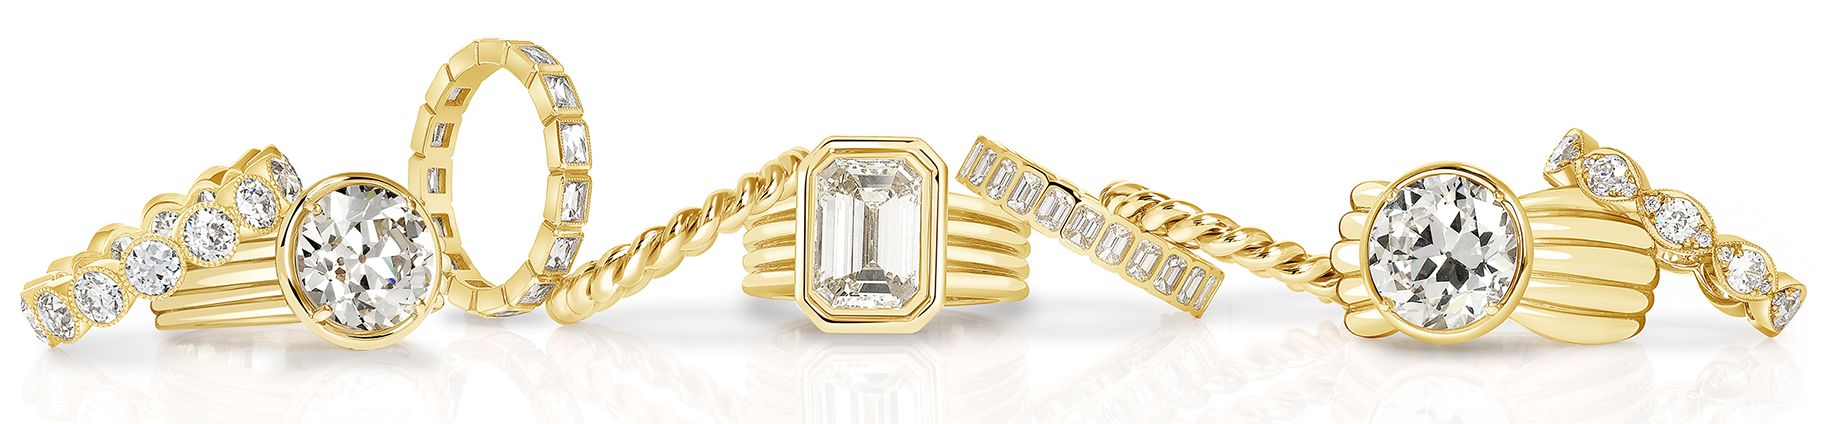 Bold gold diamond rings from Single Stone's Eleni collection along with complimentary gold bands, on a white background